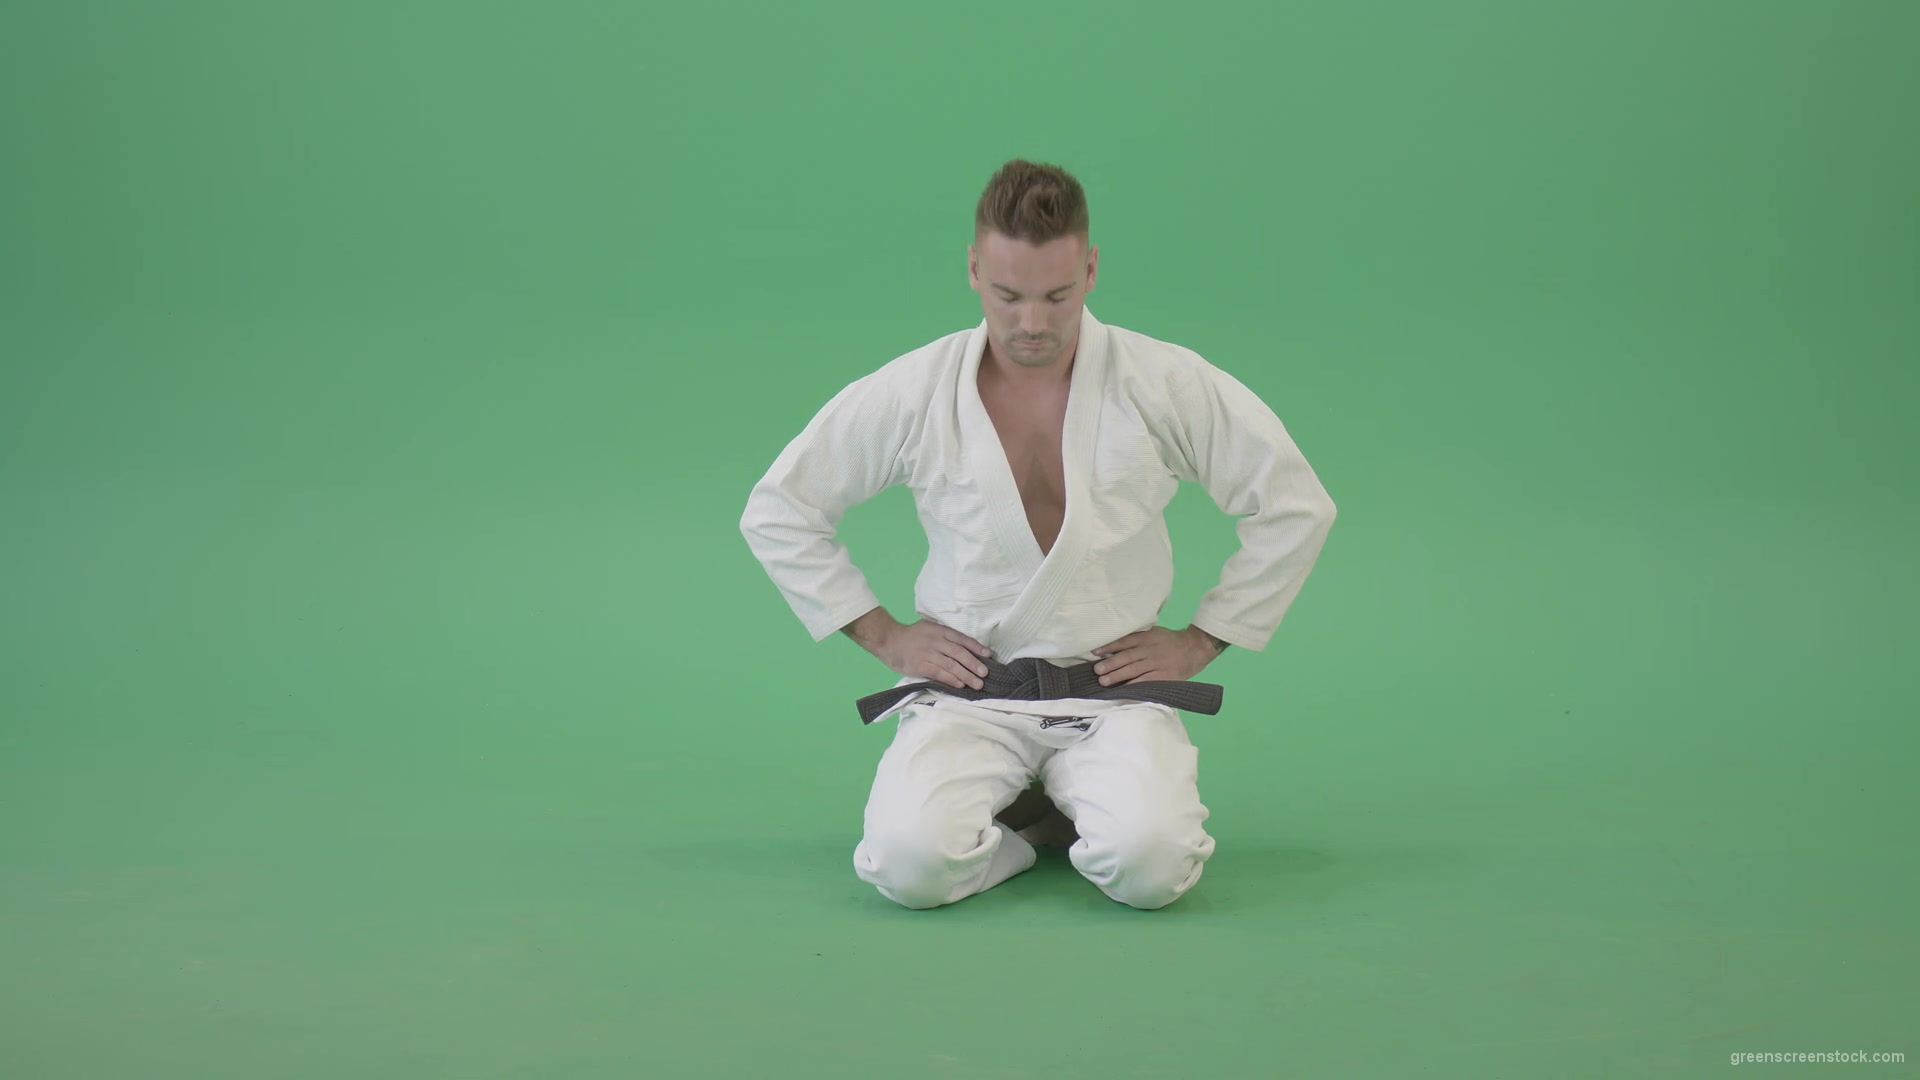 Jujutsu-Sport-man-meditating-and-breathing-slowly-isolated-on-green-screen-4K-Video-Footage-1920_008 Green Screen Stock